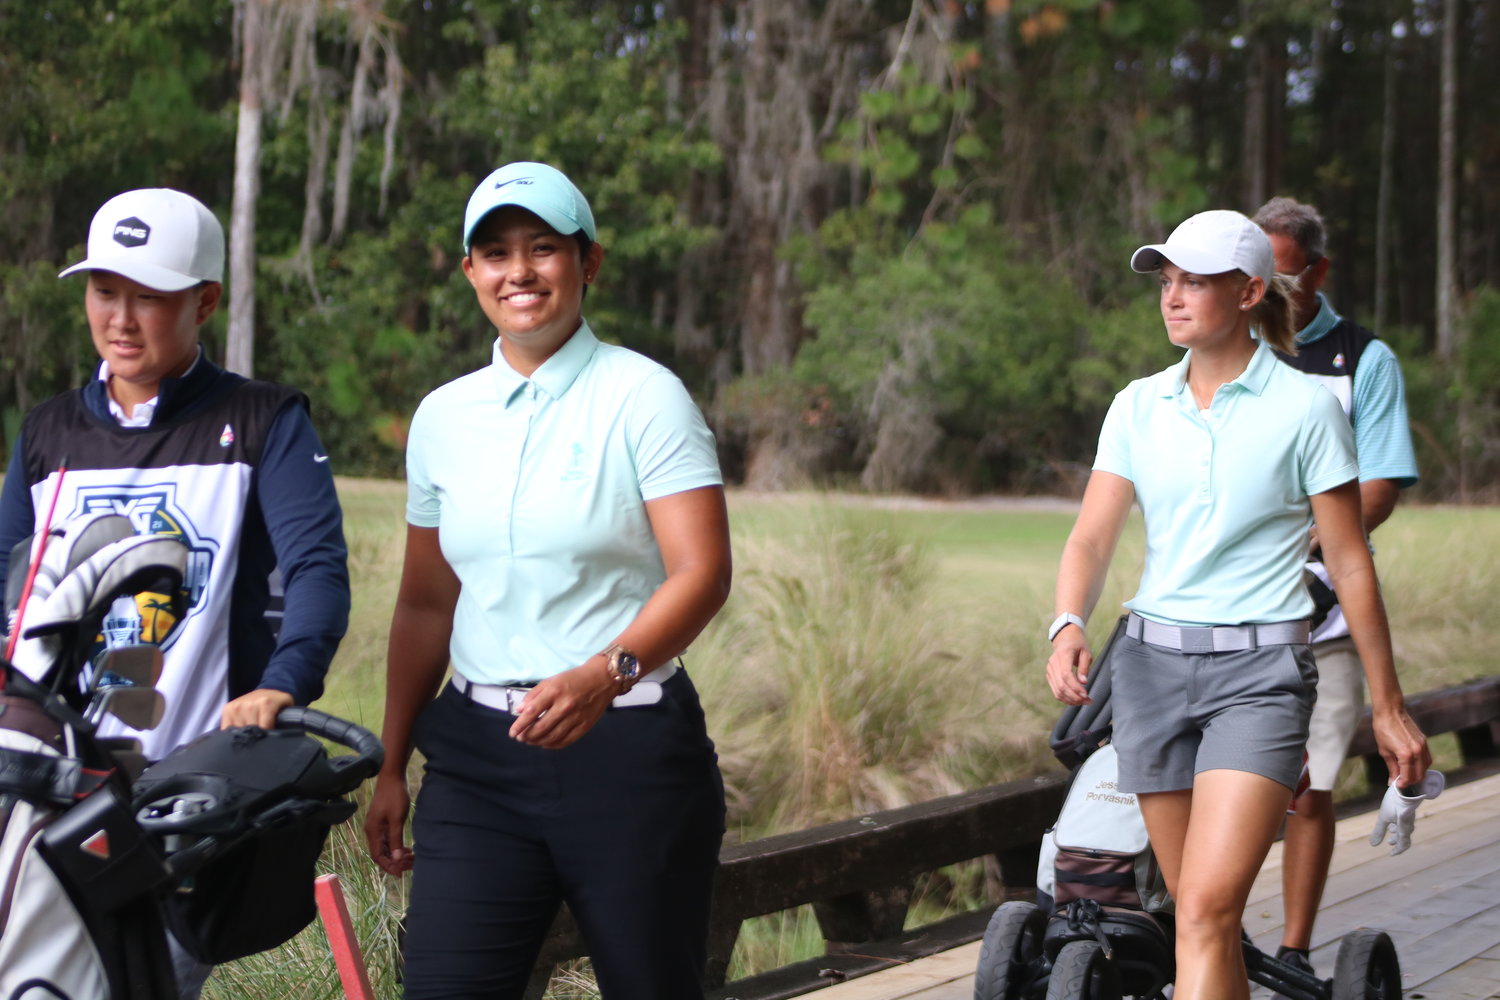 Julianne Alvarez and Jessica Porvasnik played the Slammer and Squire Golf Course at the World Golf Village during the final round of the PXG Women’s Match Play Championship.